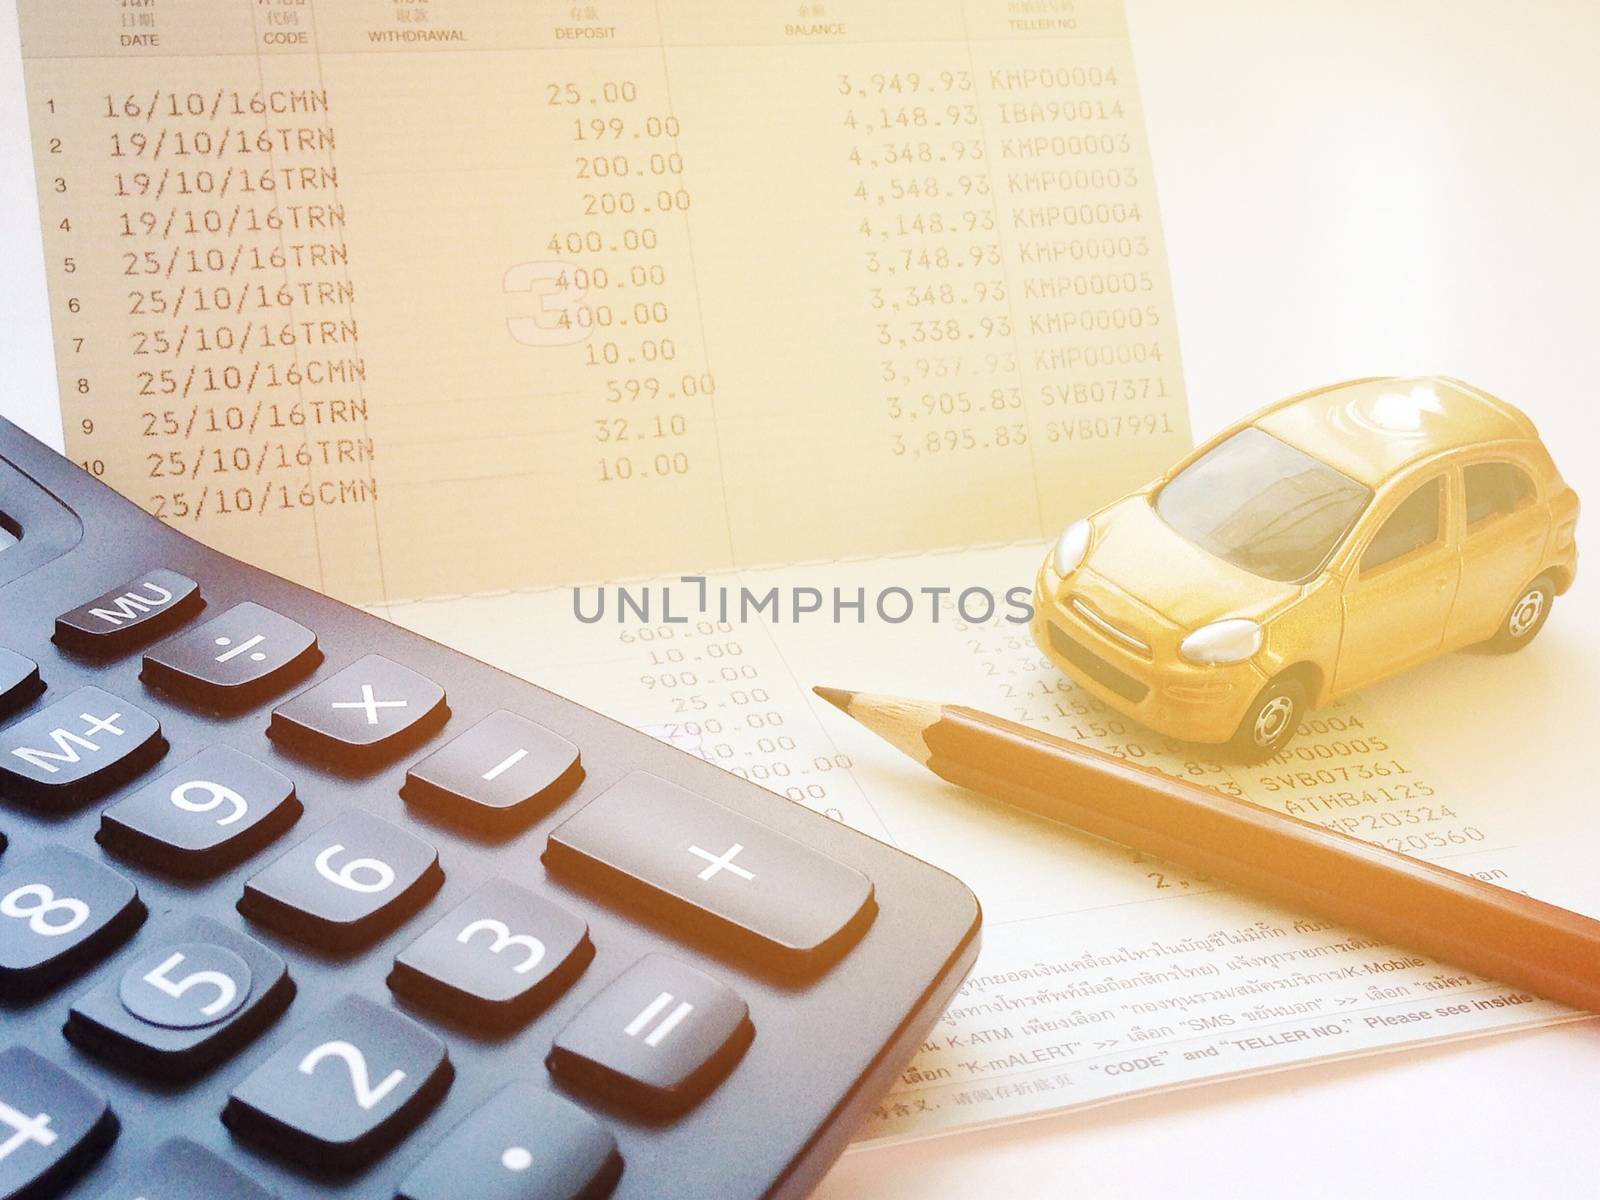 Business, finance, saving money, banking or car loan concept : Miniature car model, calculator and saving account book or financial statement on office desk table